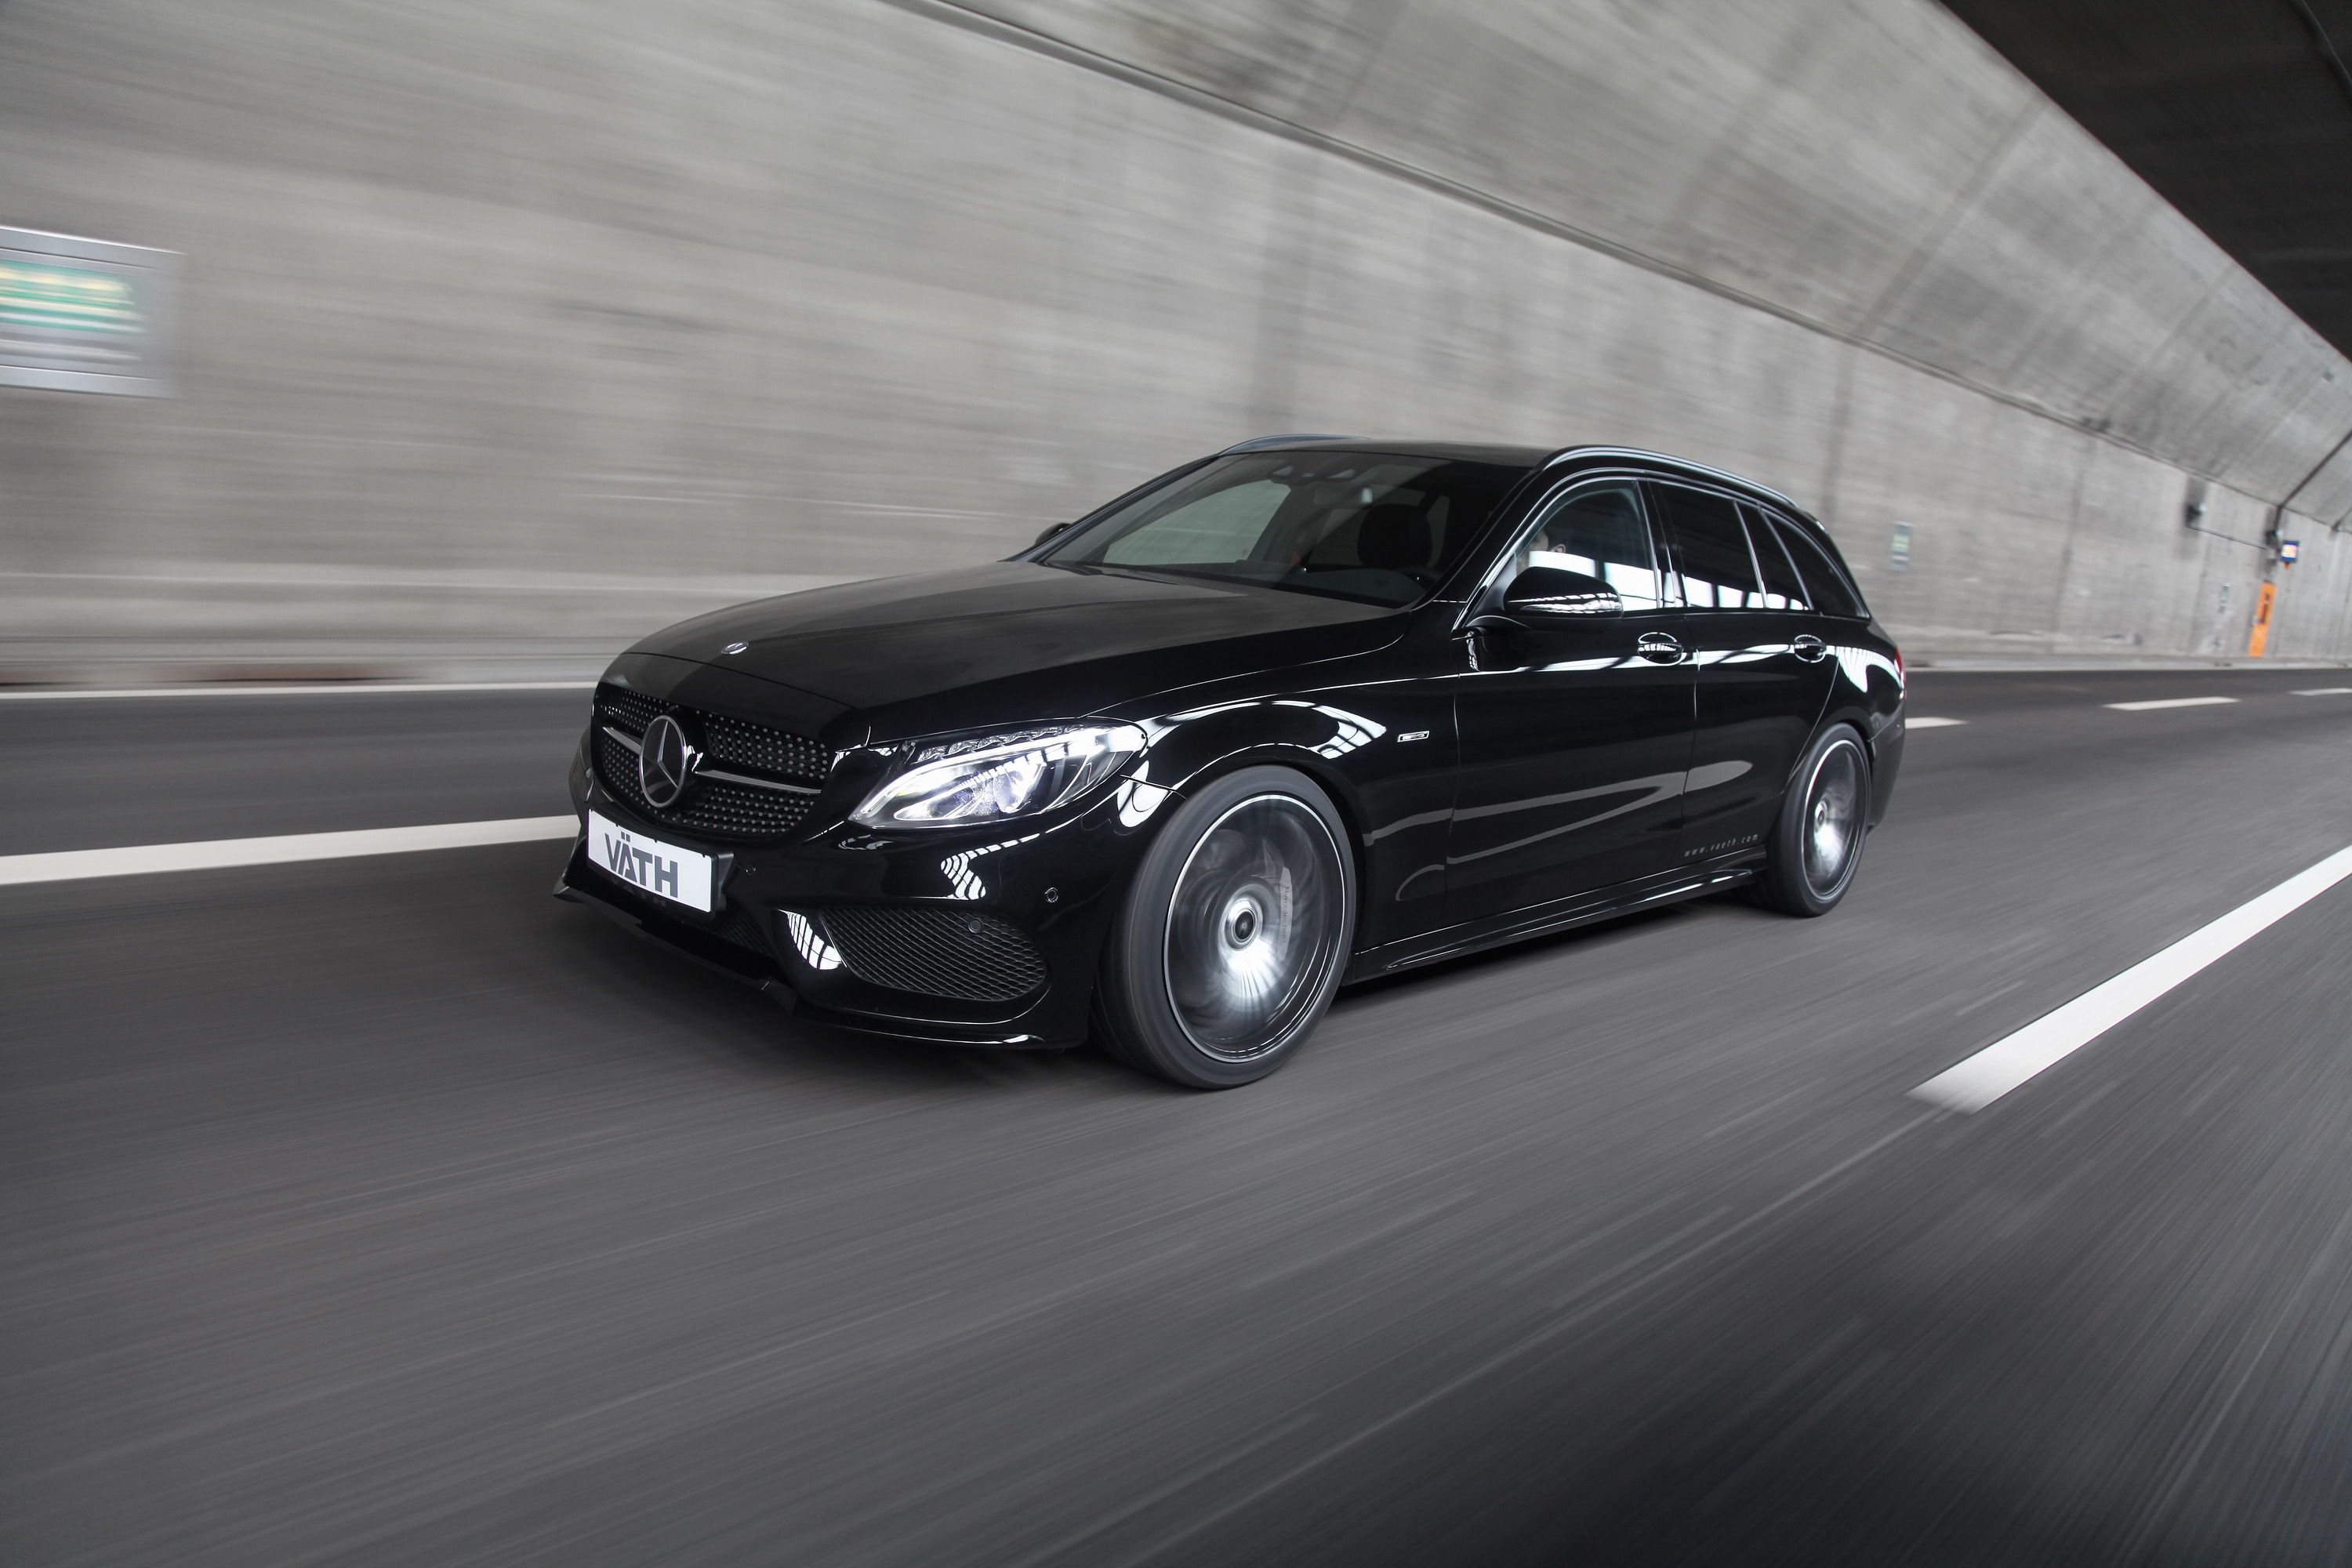 2016 Mercedes C450 AMG 4MATIC by Vath